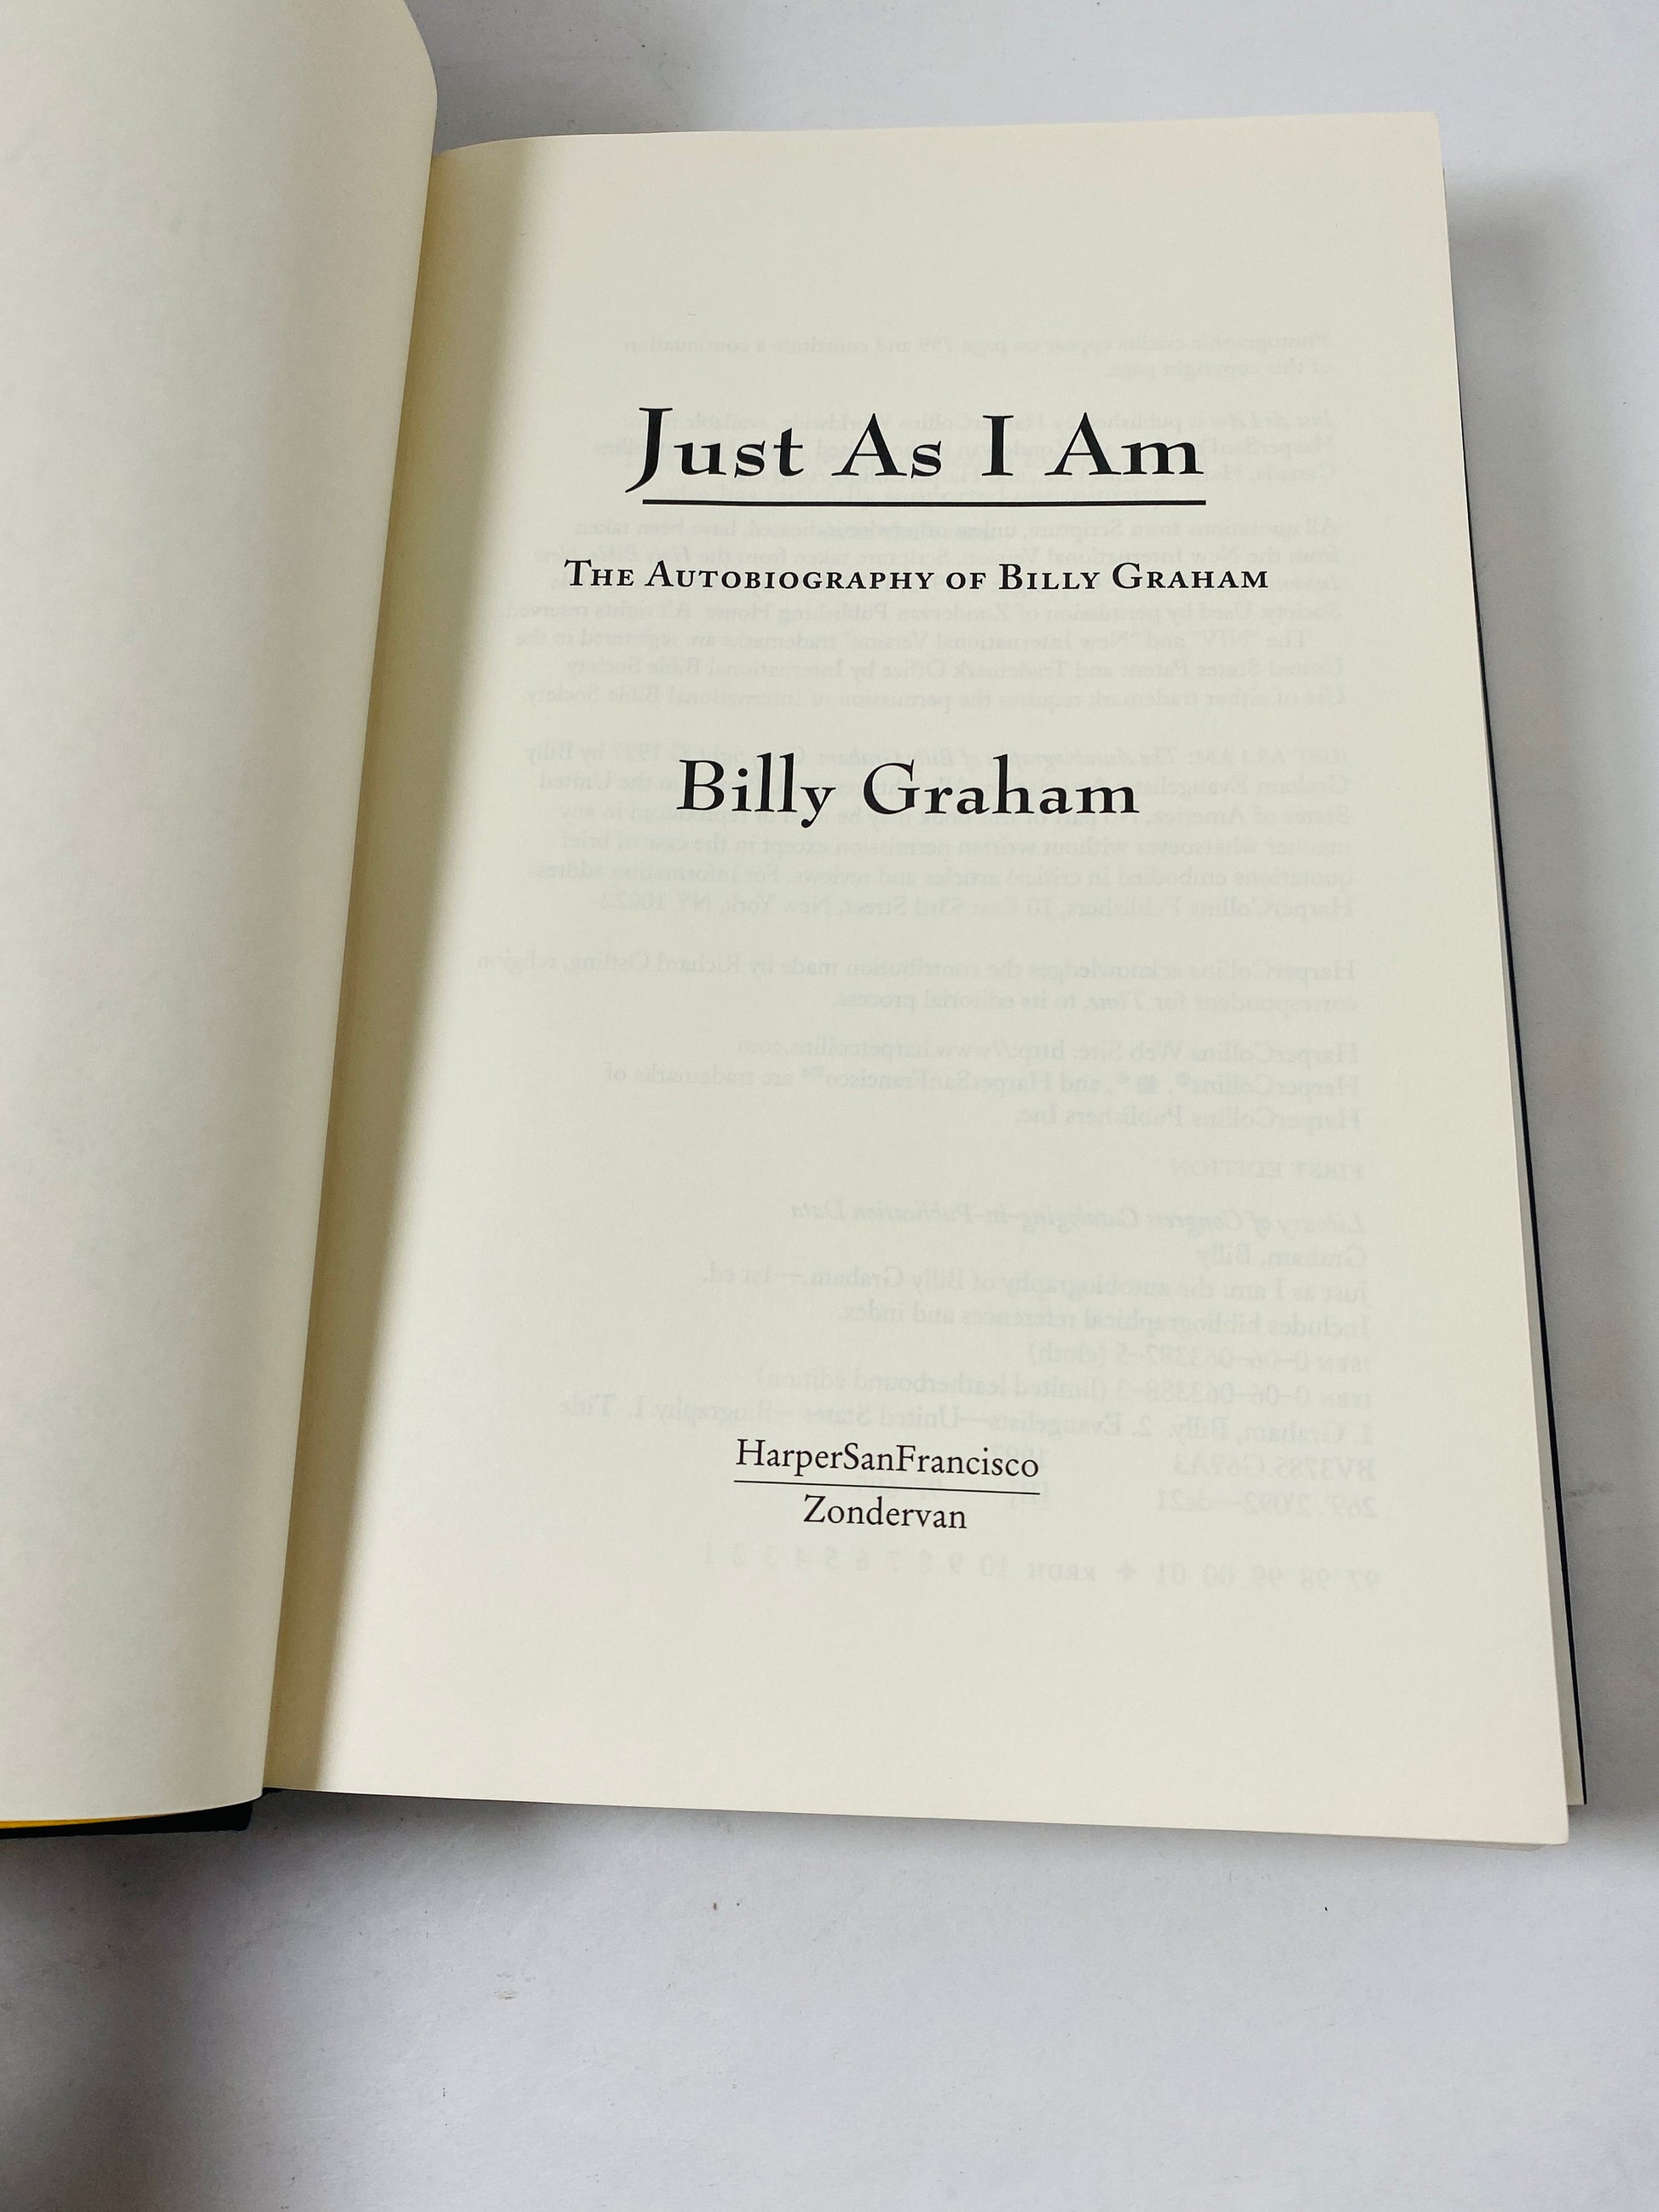 Just As I Am Autobiography of Billy Graham FIRST EDITION vintage book circa 1997 Christian Pastoral reflections